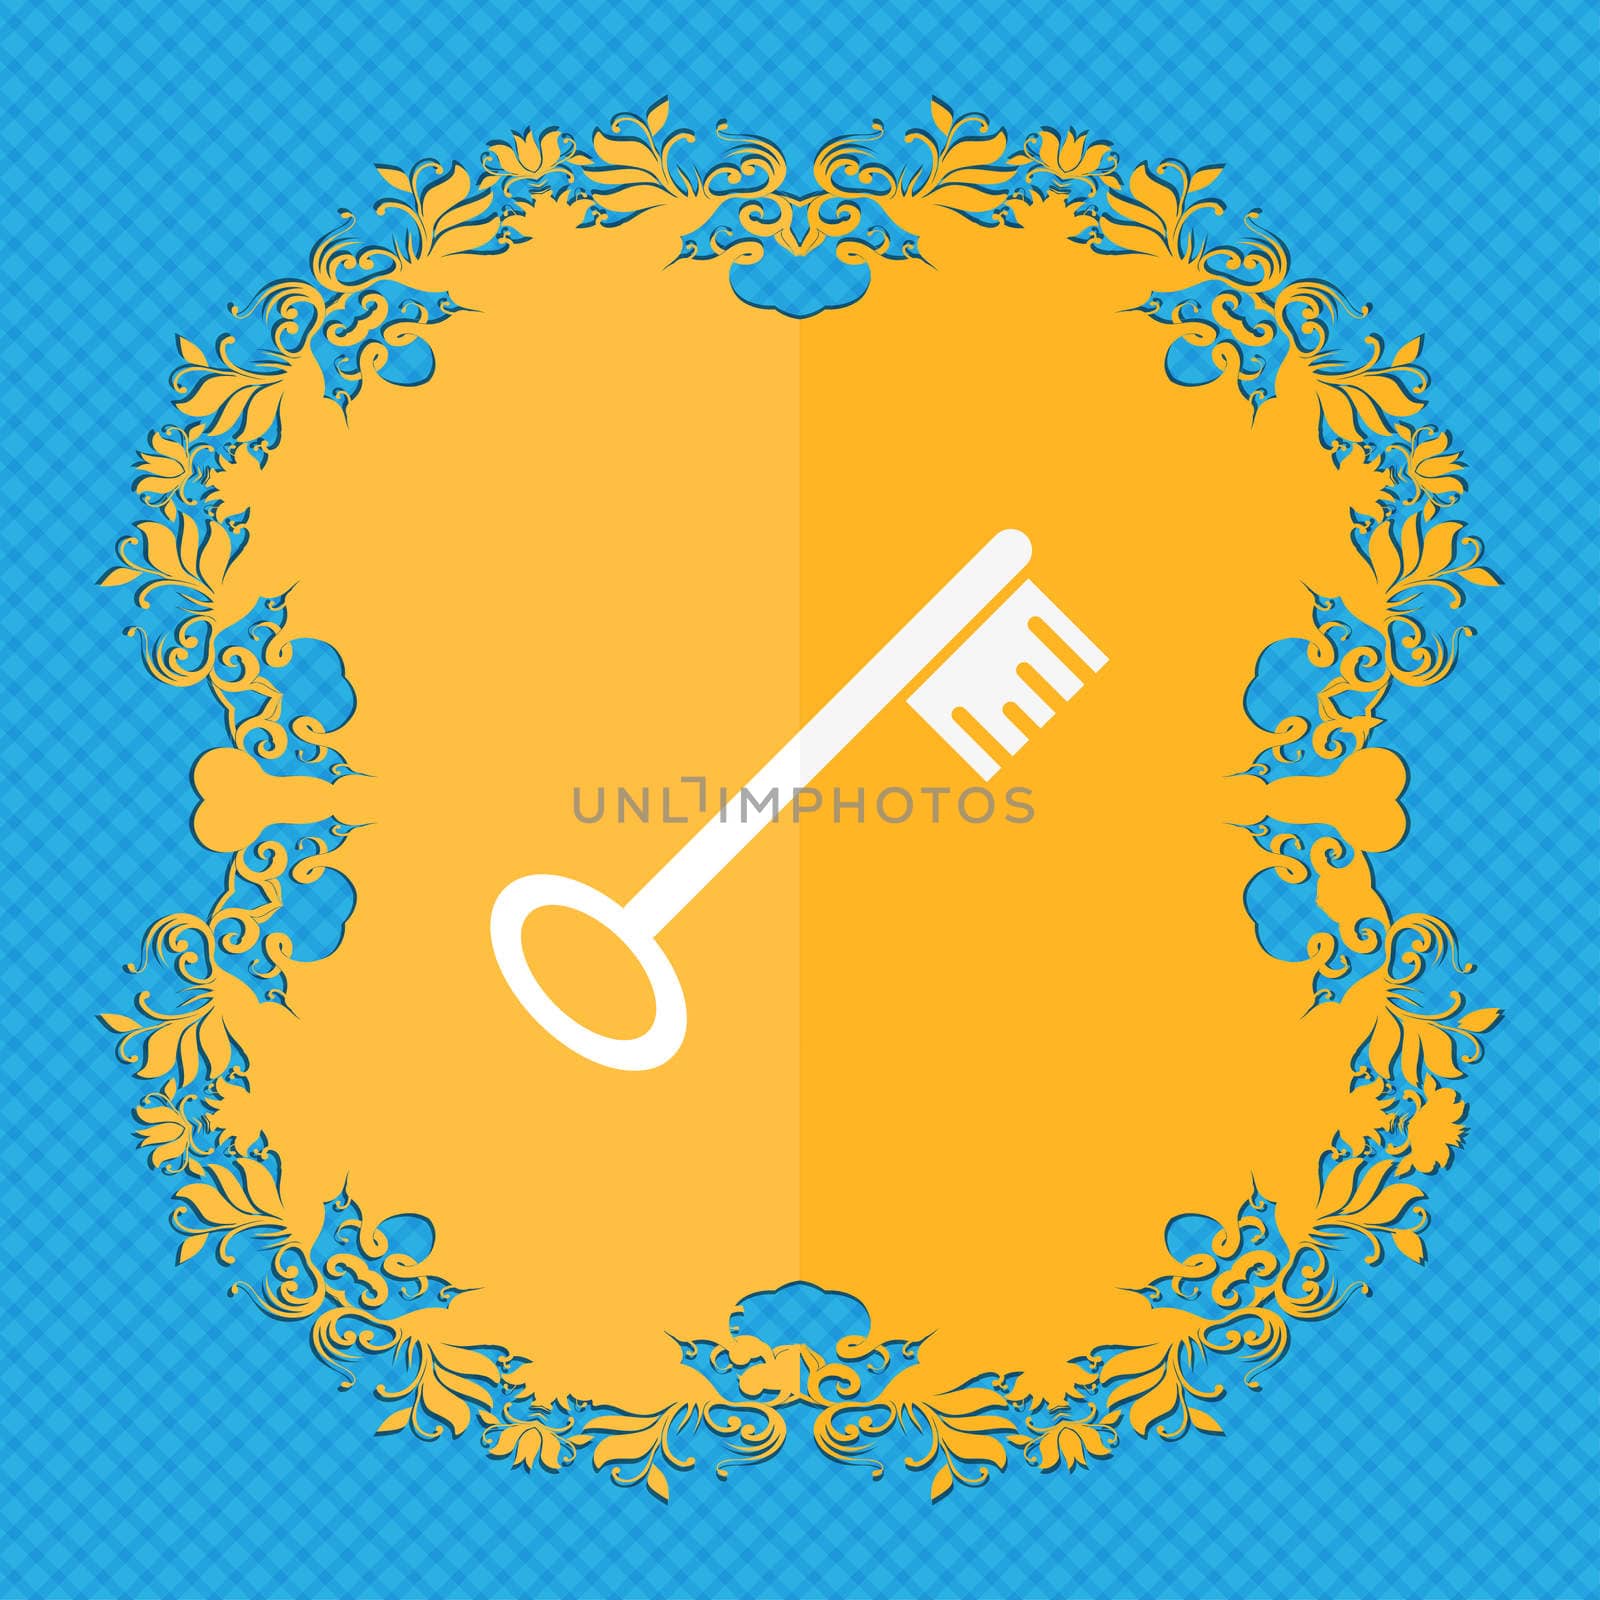 Key icon sign. Floral flat design on a blue abstract background with place for your text. illustration